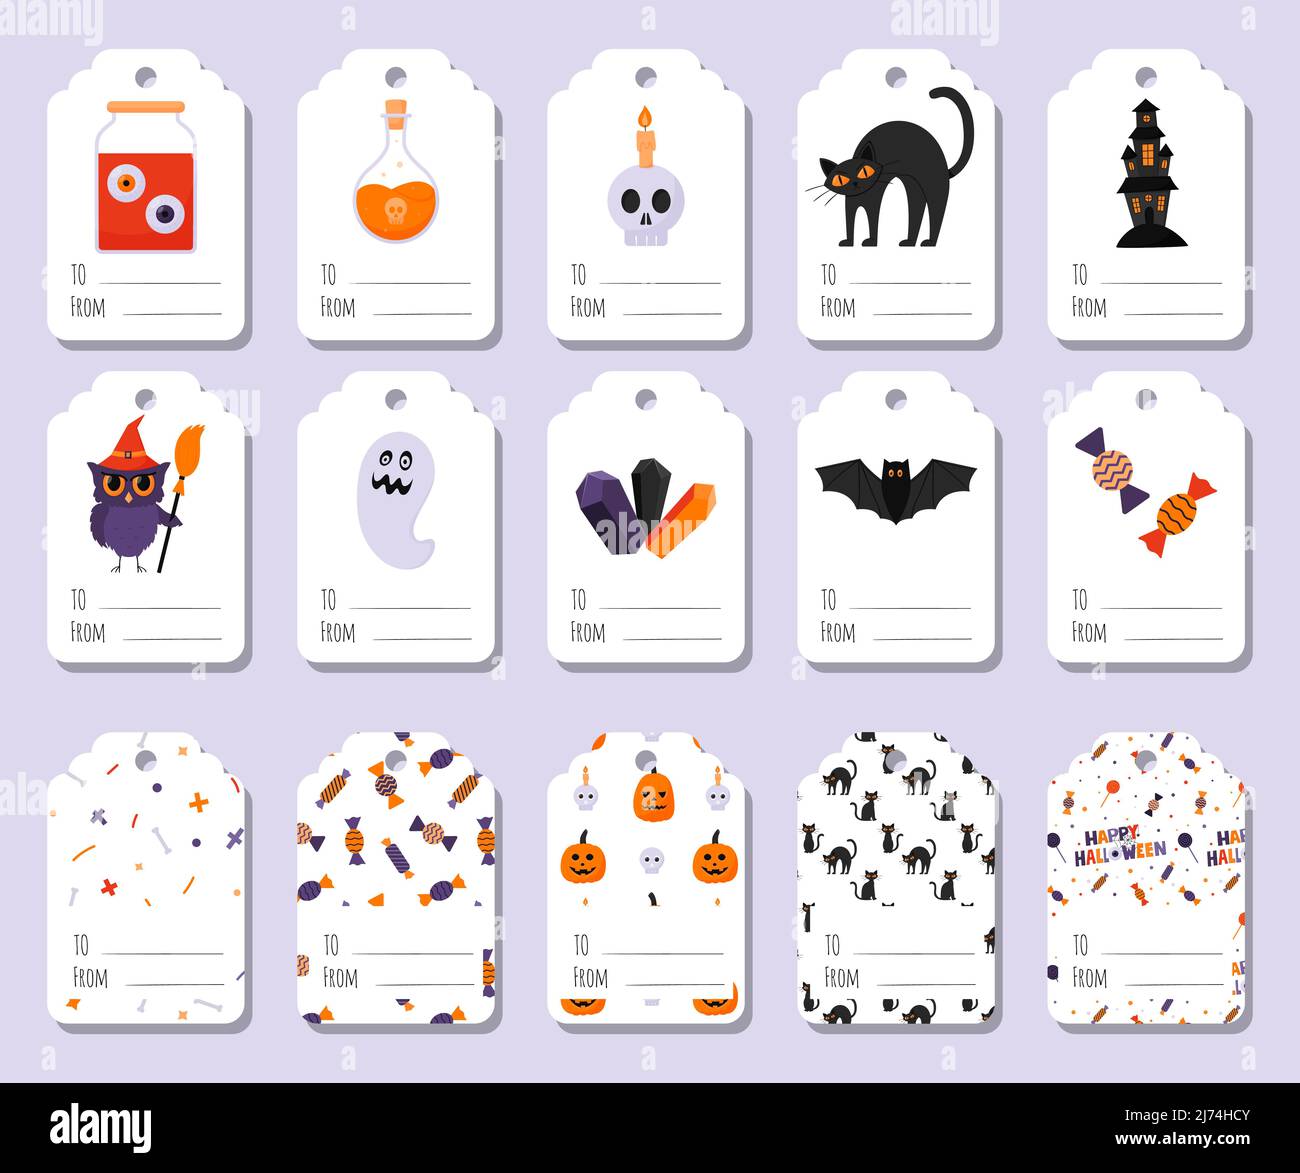 A set of colorful gift tags with Halloween symbols and words - to whom, from whom. Crystals, candy, a haunted house, a ghost, an owl, a jar with eyes. Stock Vector